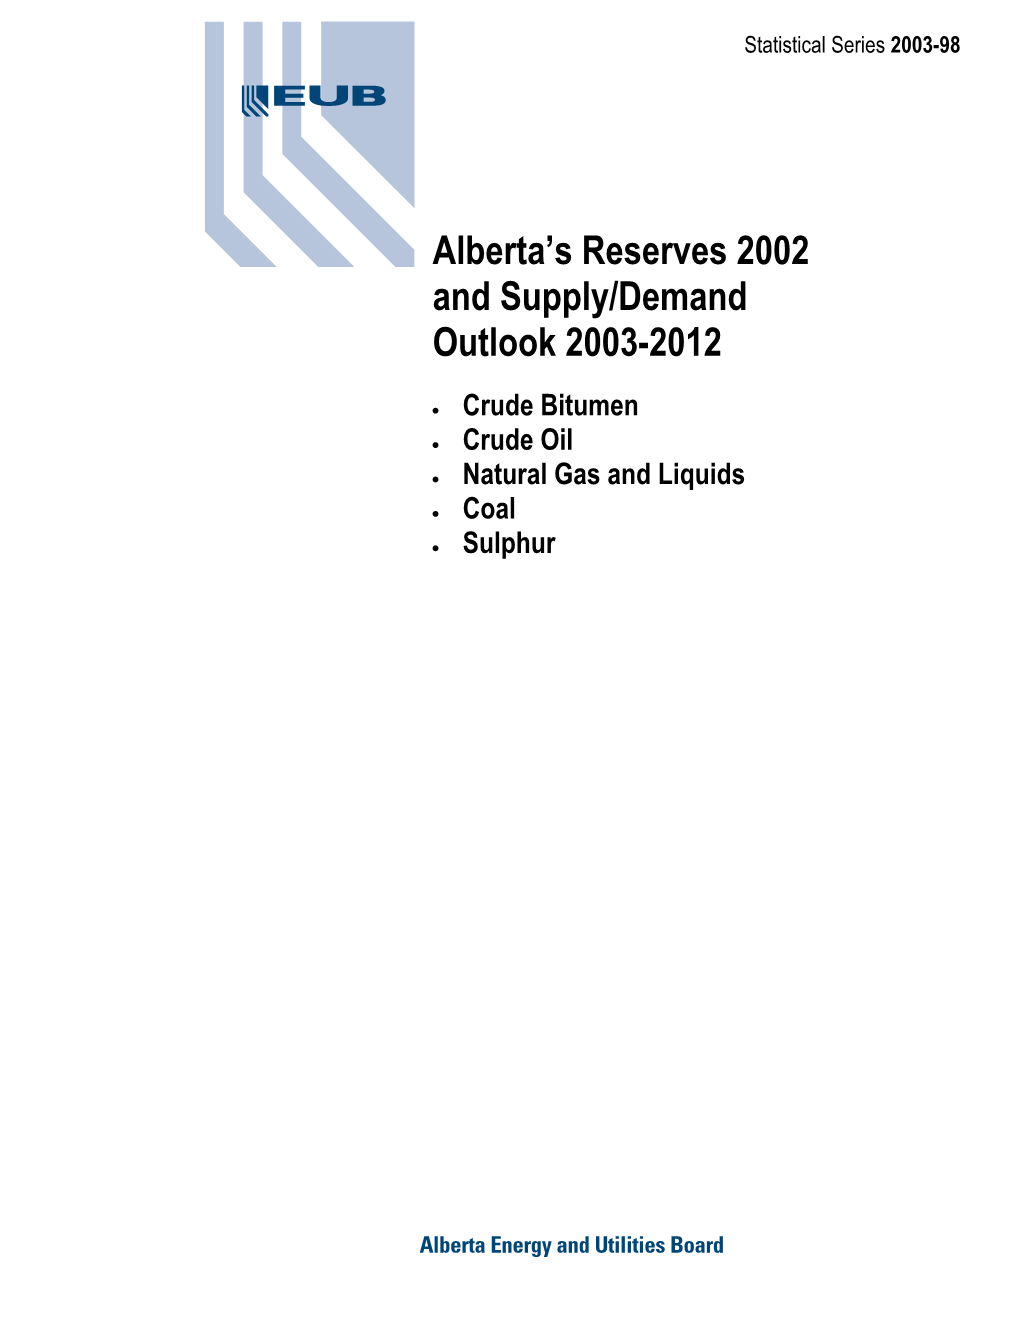 Alberta's Reserves 2002 and Supply/Demand Outlook 2003-2012